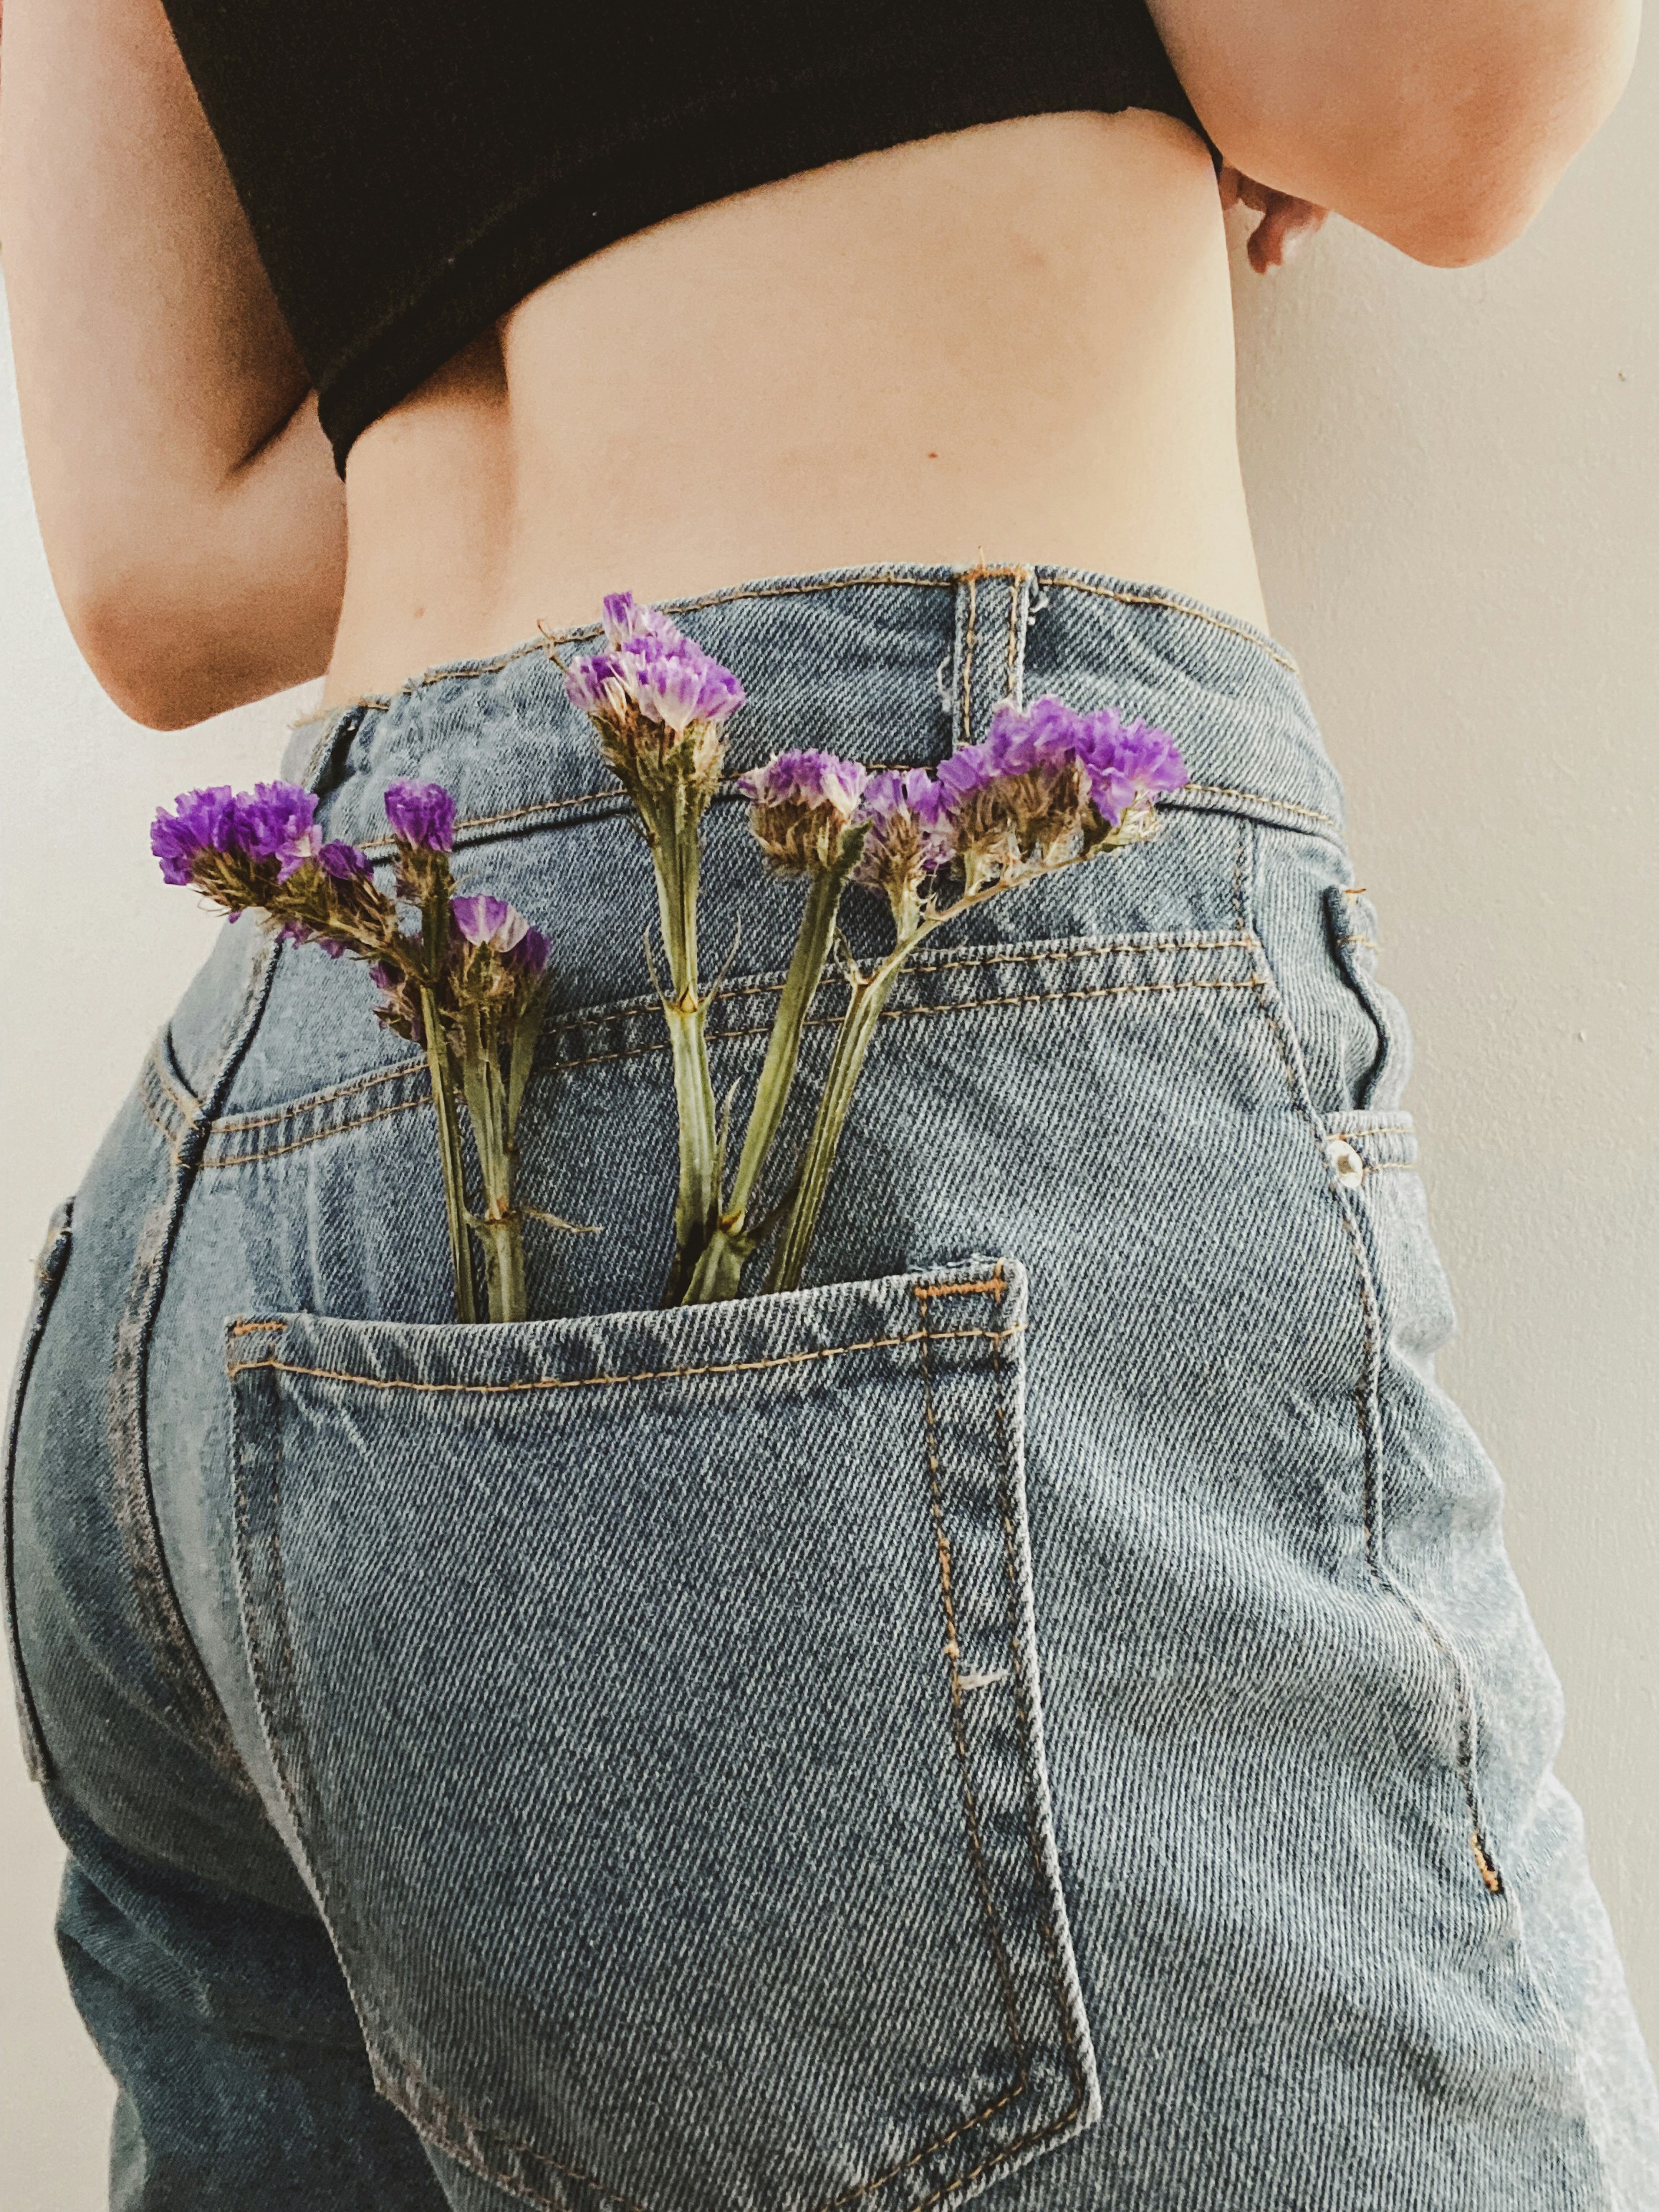 Image of a girl with flowers in her back pocket